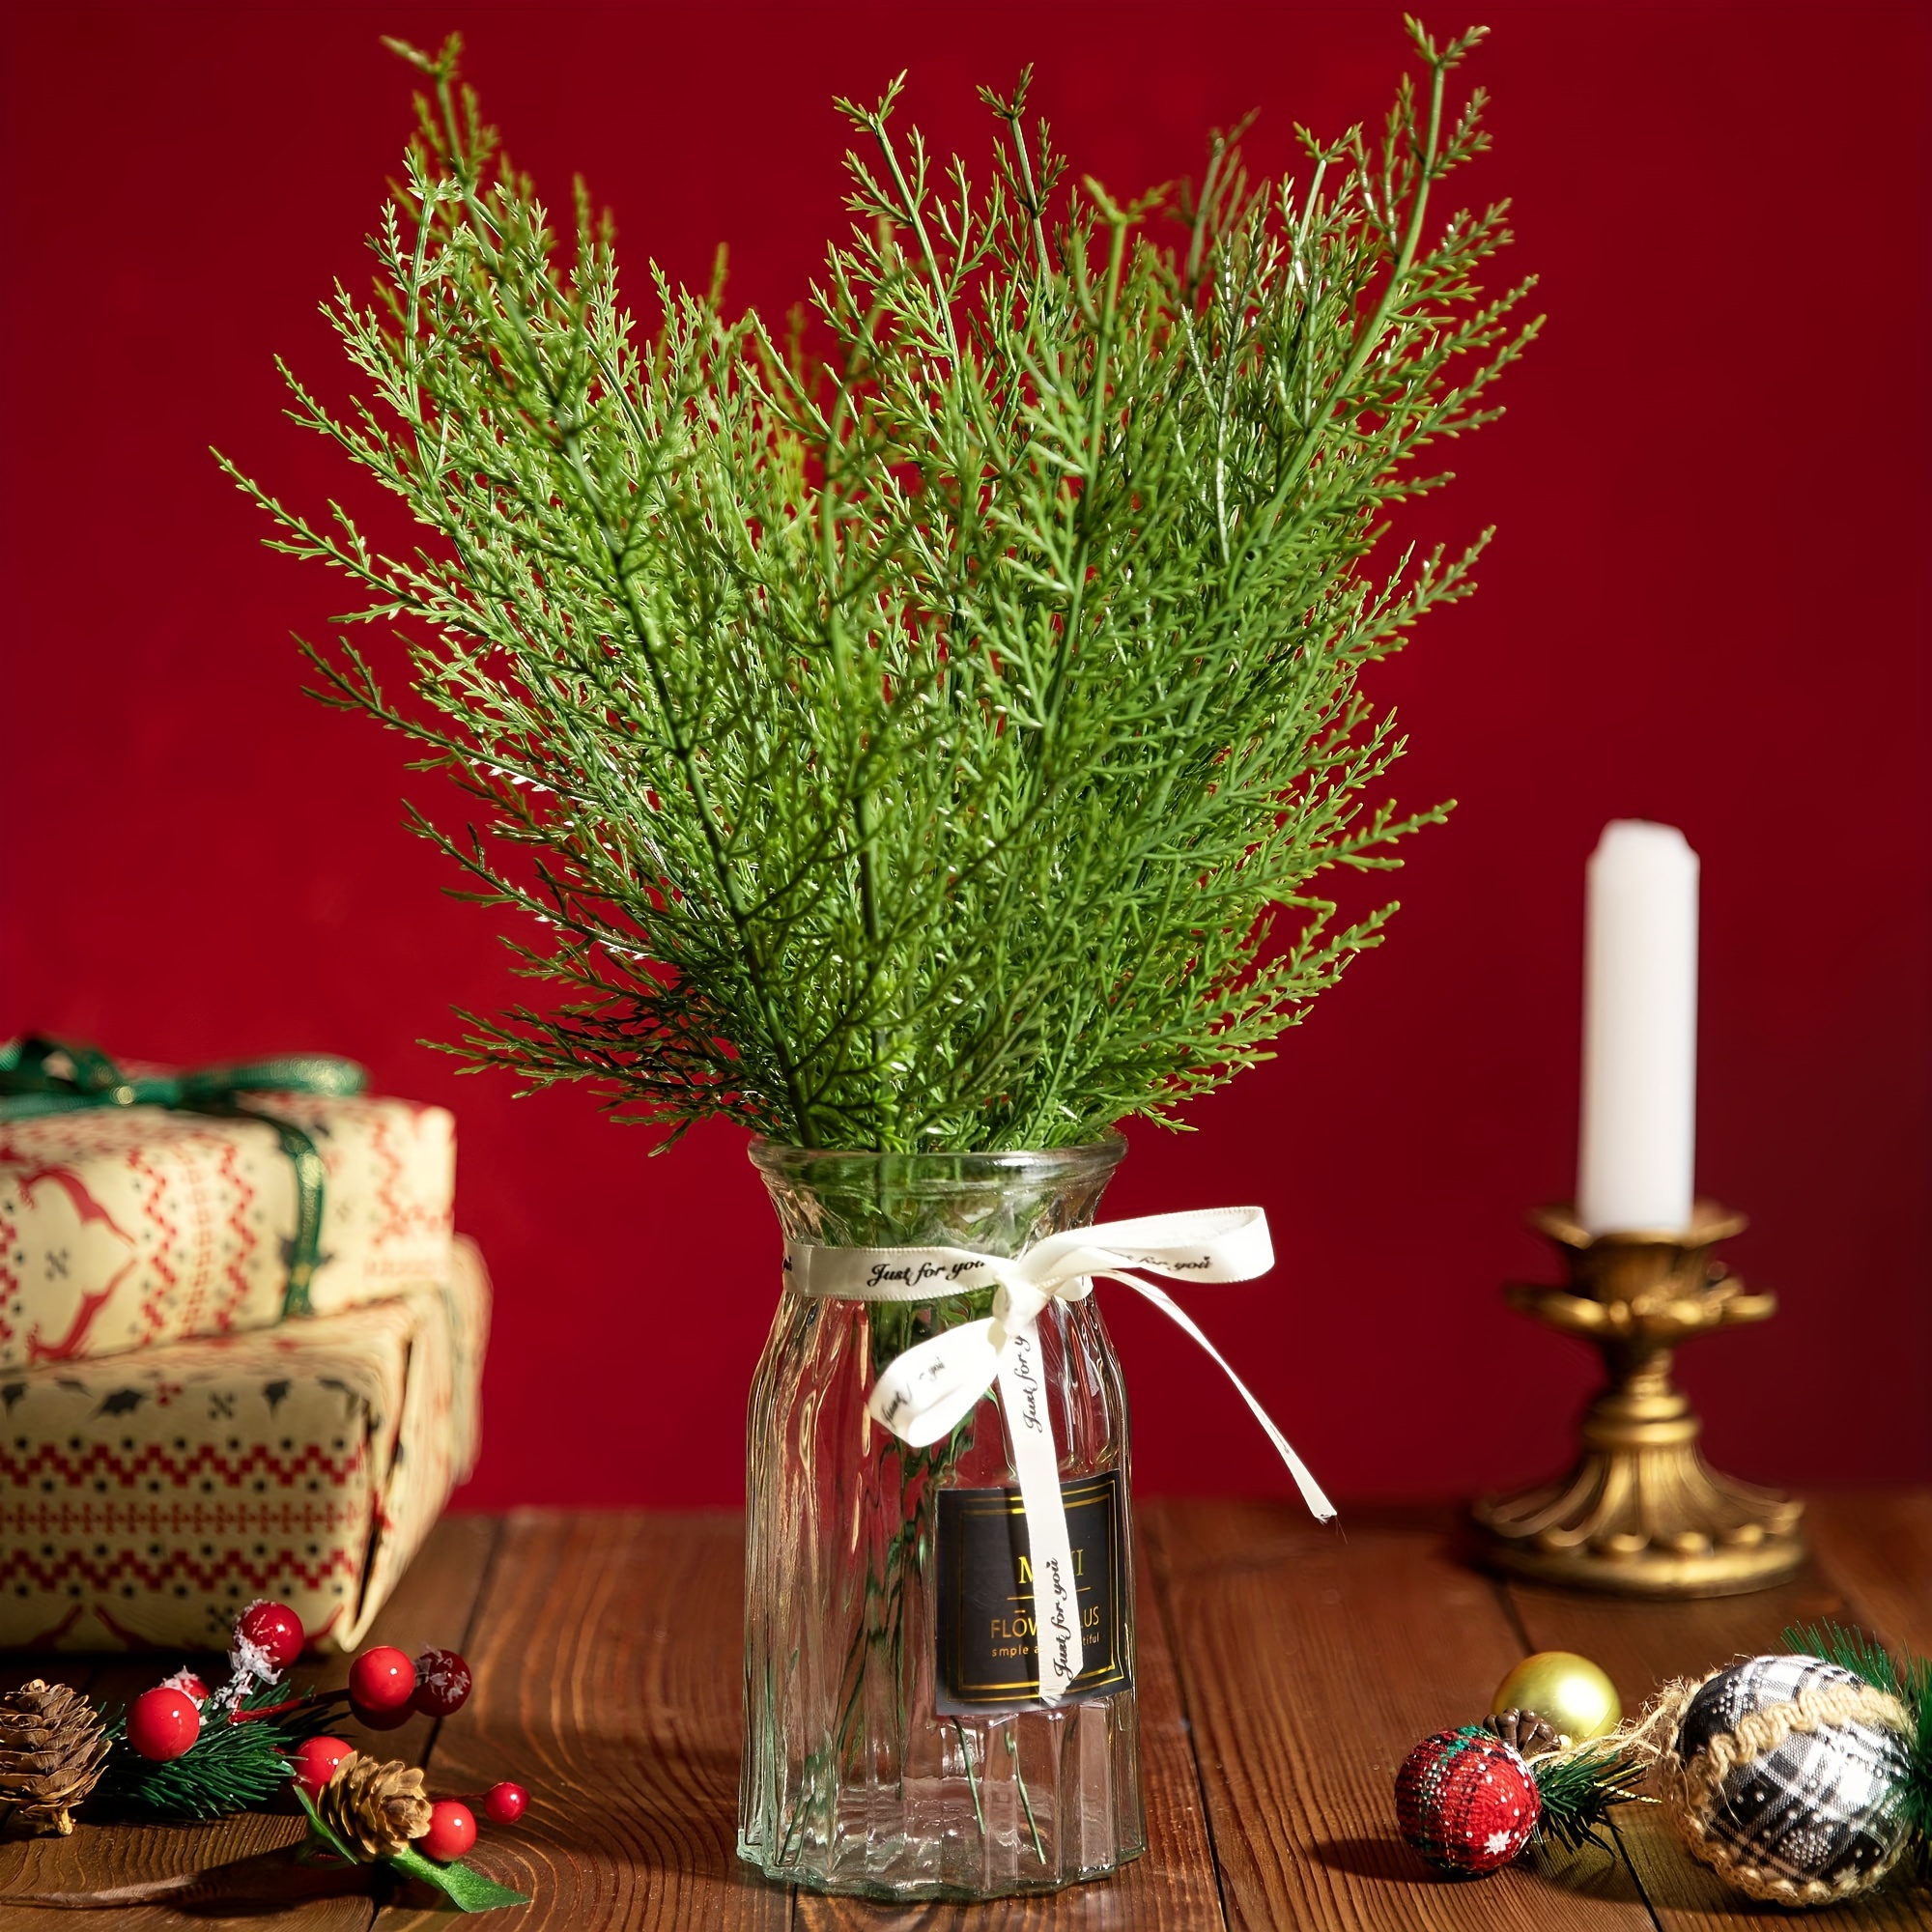 8 15 30pcs christmas artificial pine needles artificial pine branches artificial greenery stems decorative faux tree branches xmas wreath home party decor